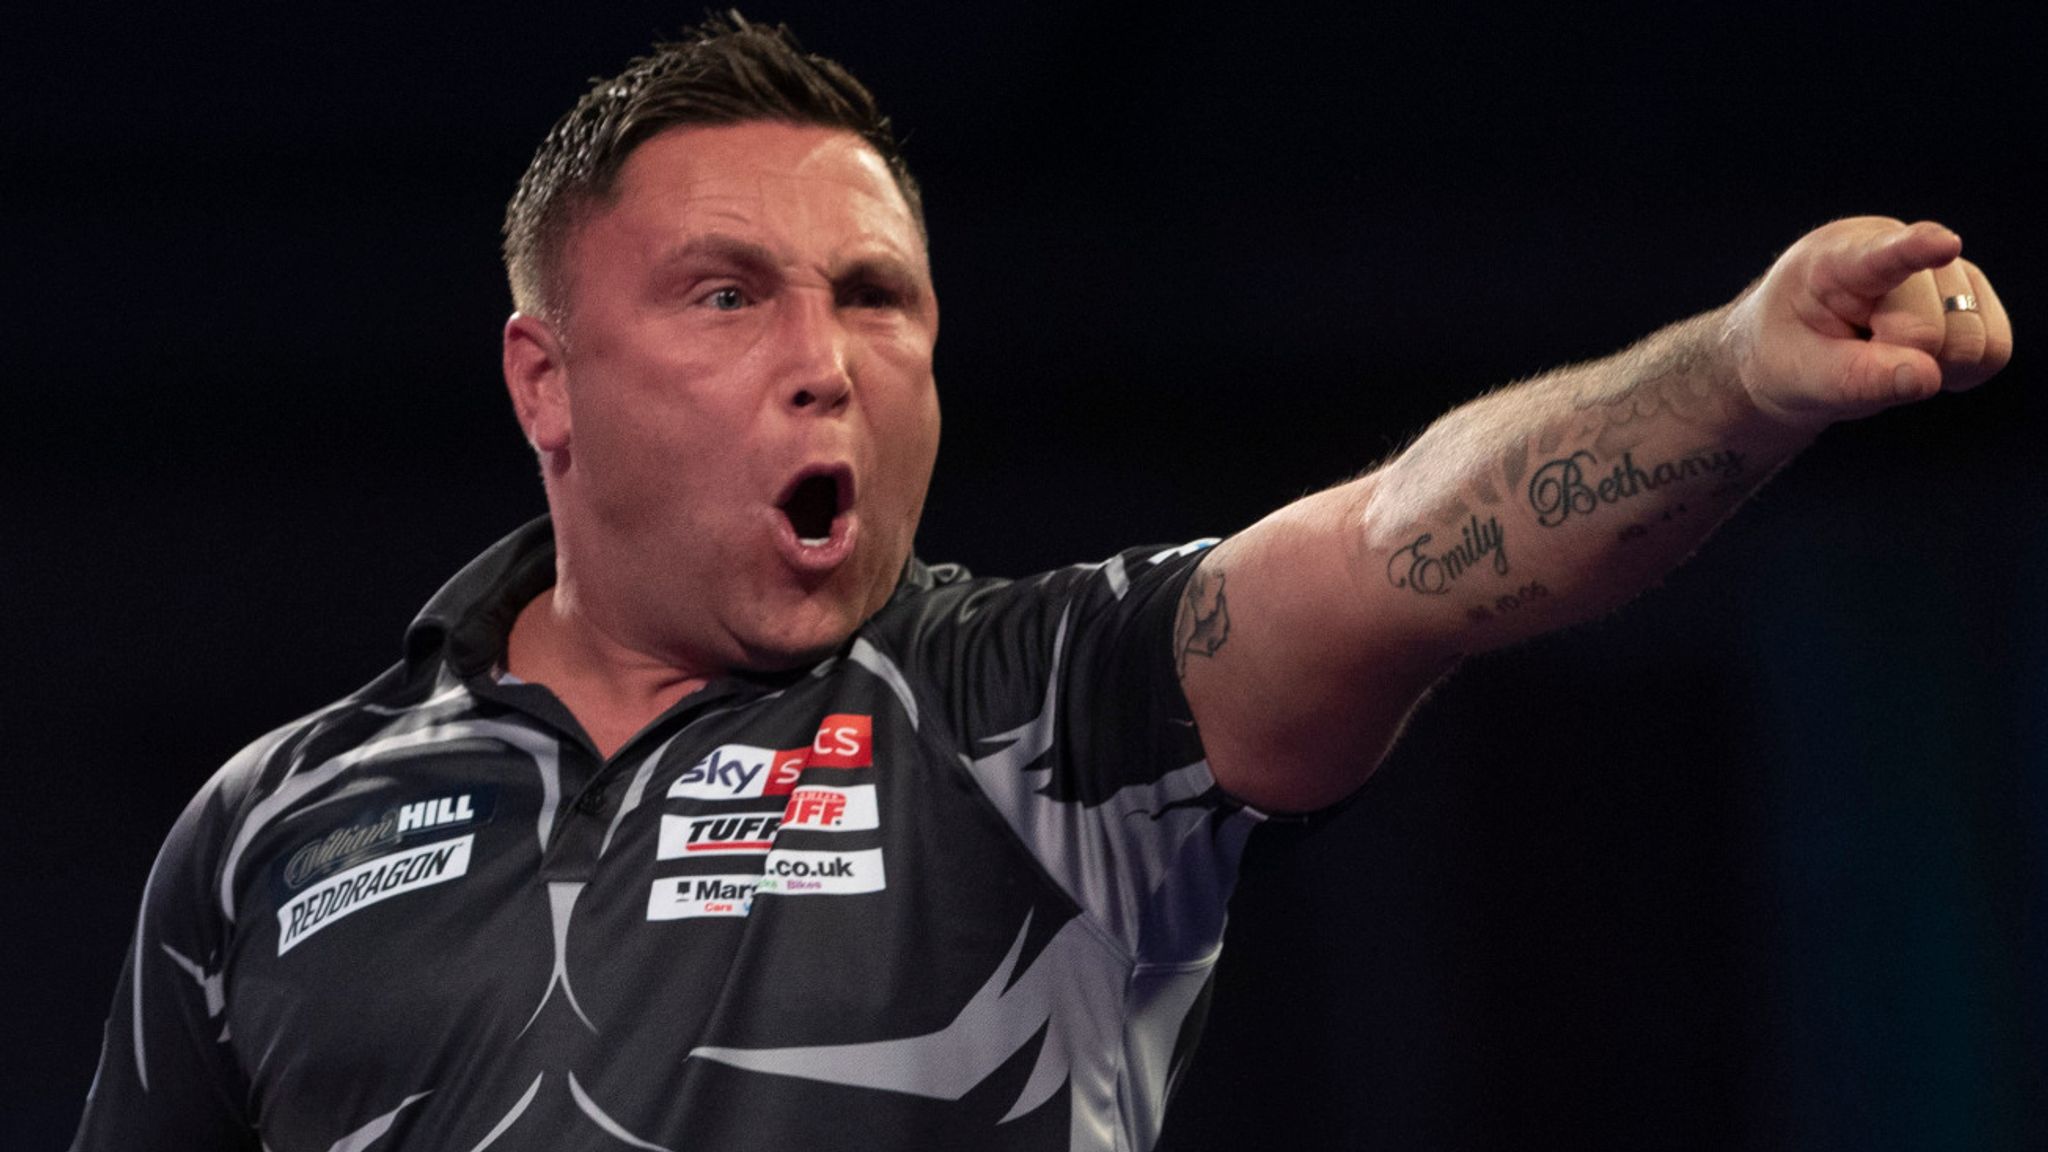 Gerwyn Price survives a scare to beat Edhouse in PDC world